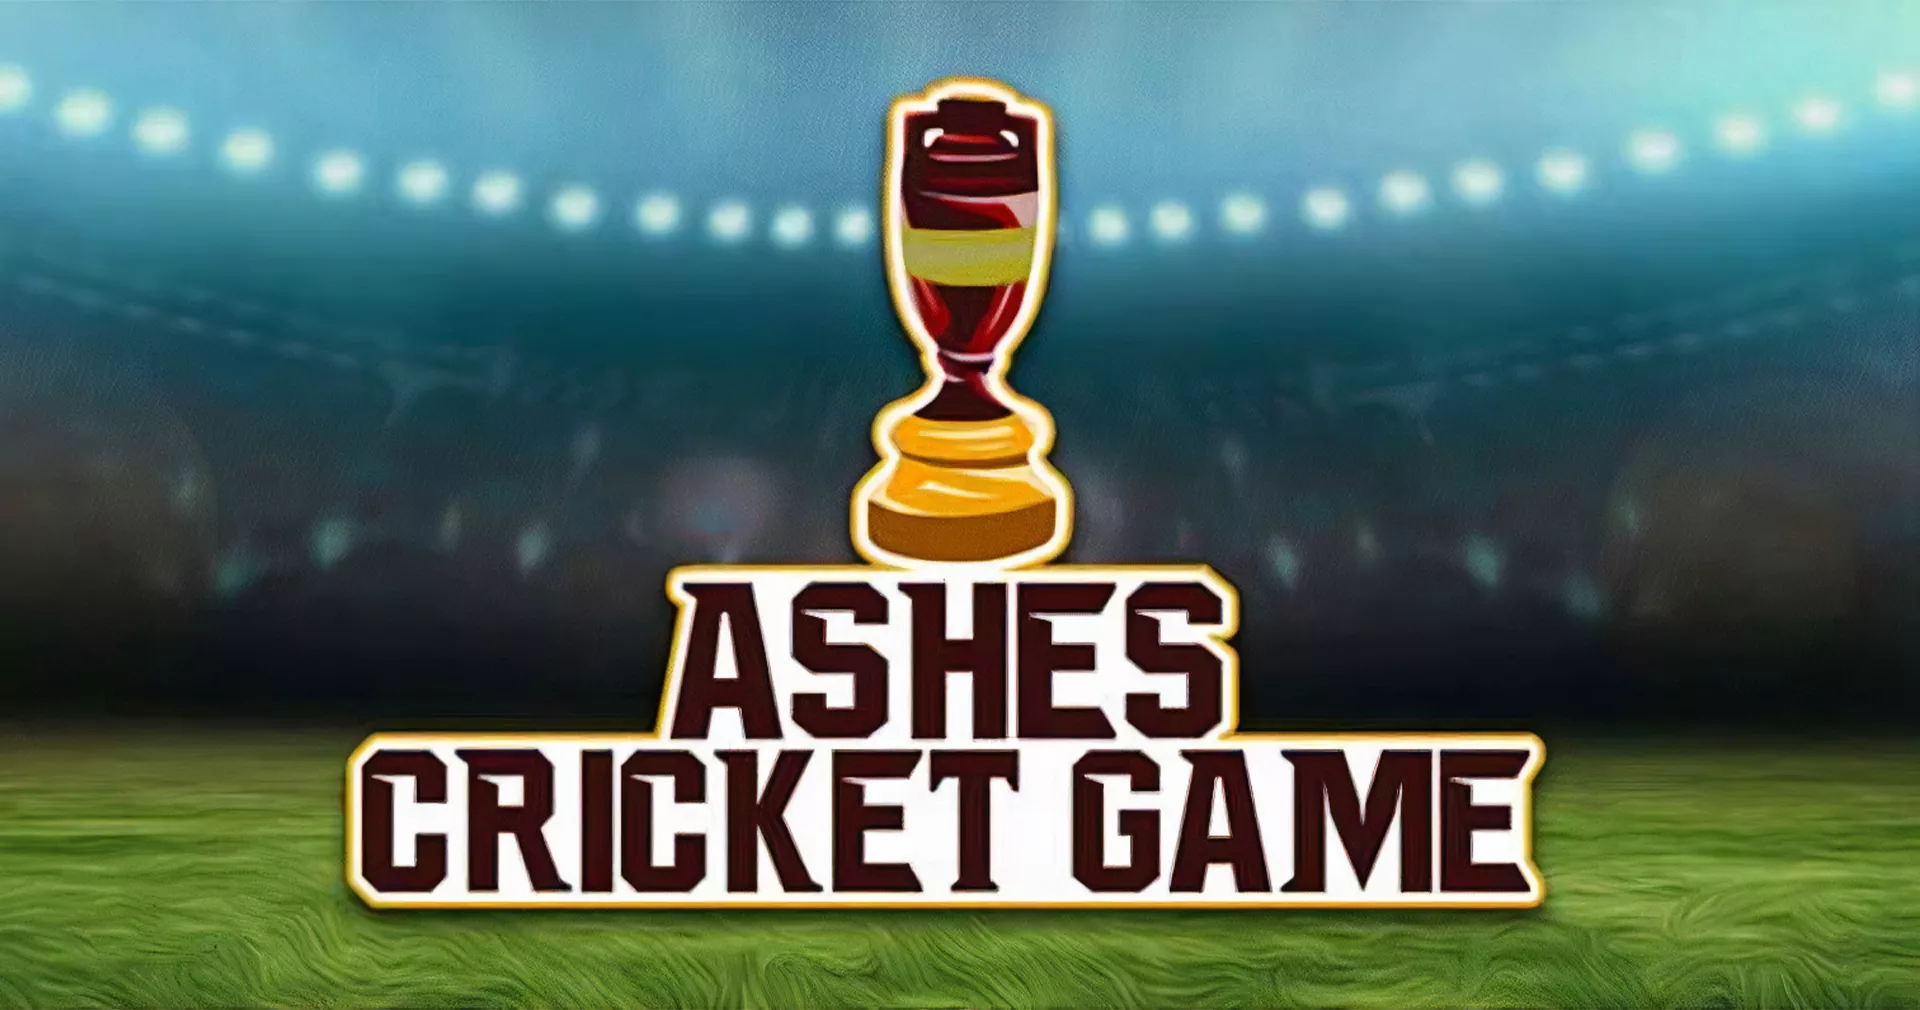 You can place bets on The Ashes Series after registering on the site.